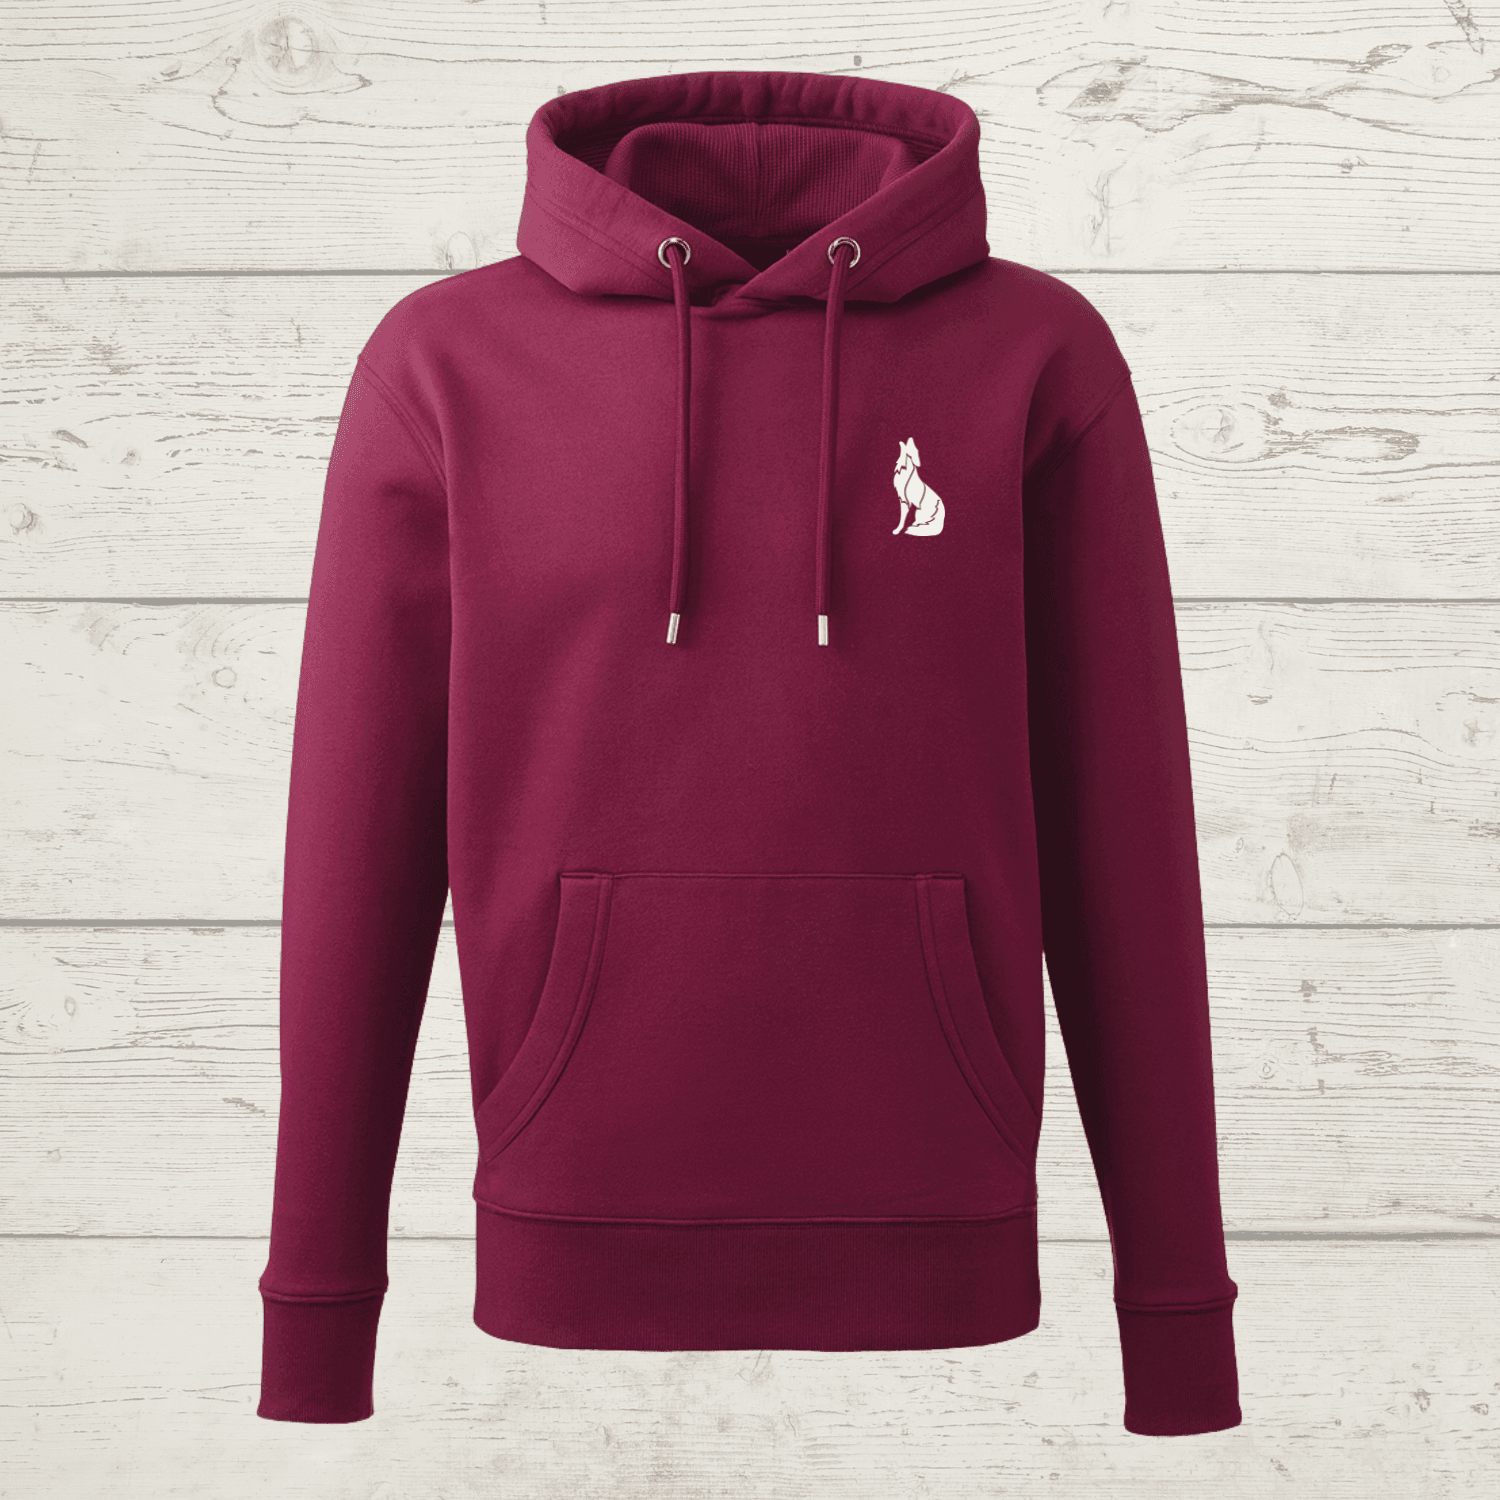 Ecoyote new super luxe planting 25 trees hoody - burgundy /